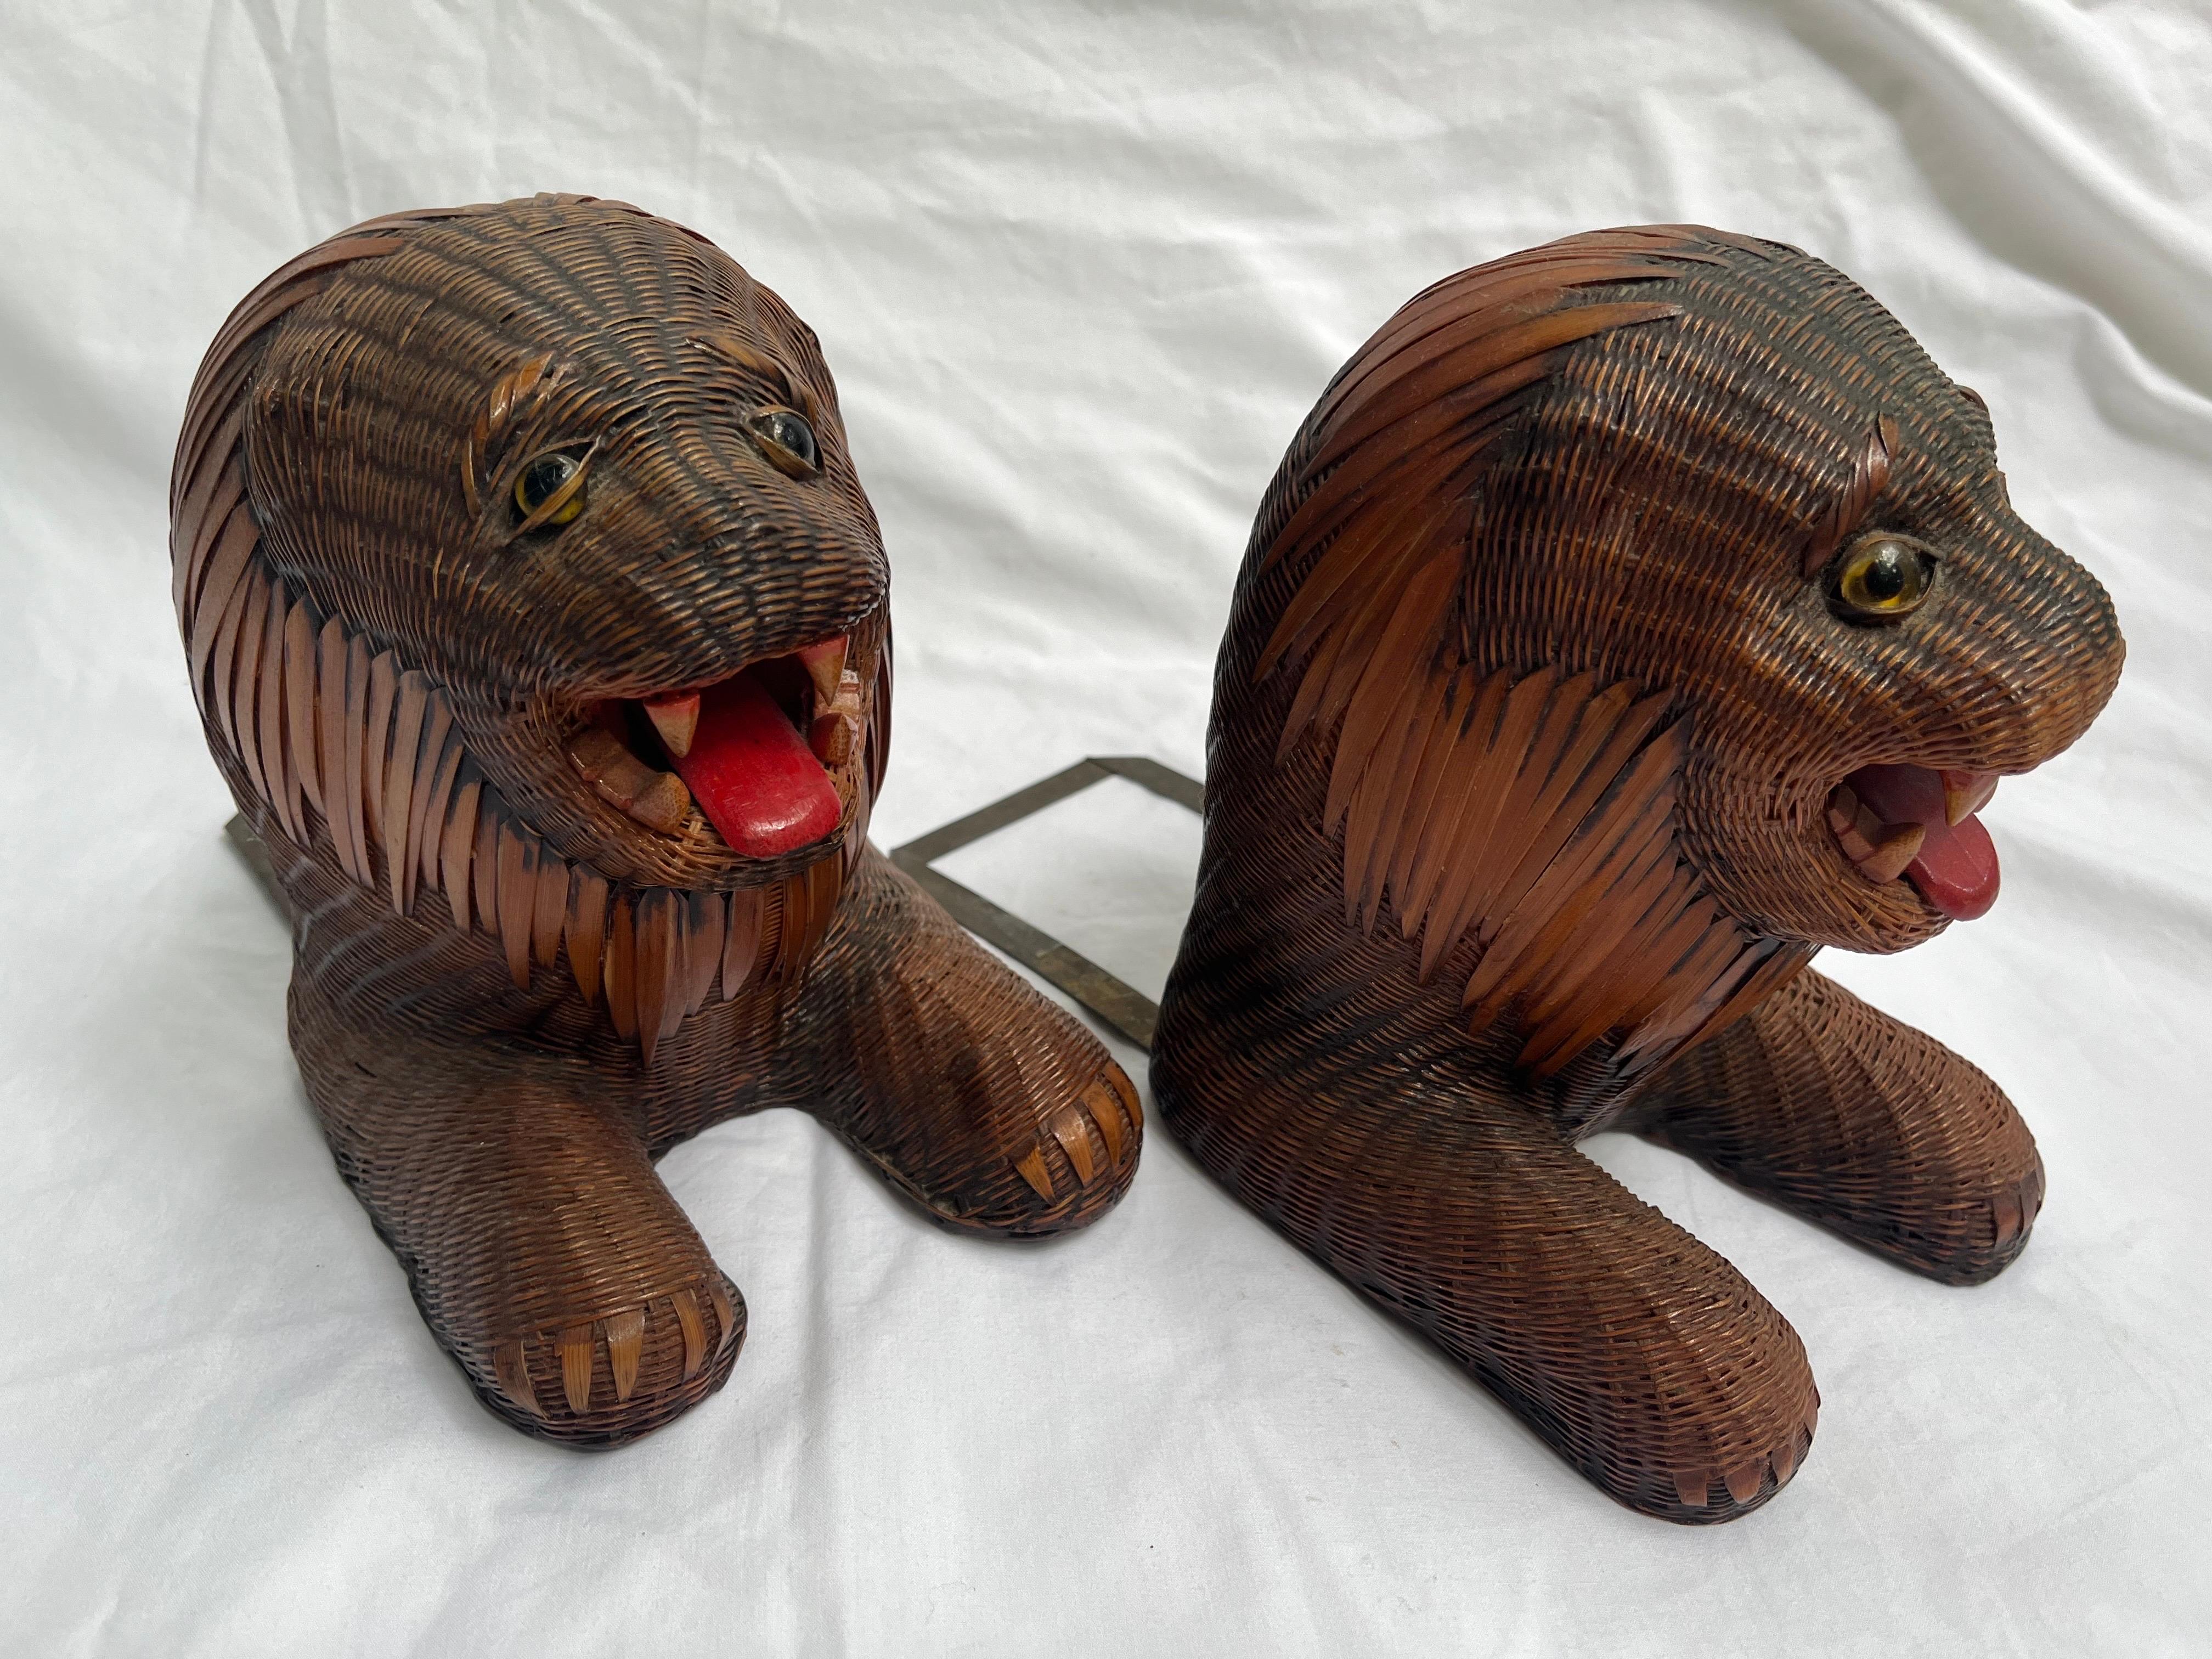 Chinese Pair Lion Bookends in Woven Reed and Polychrome from Shanghai Collection China